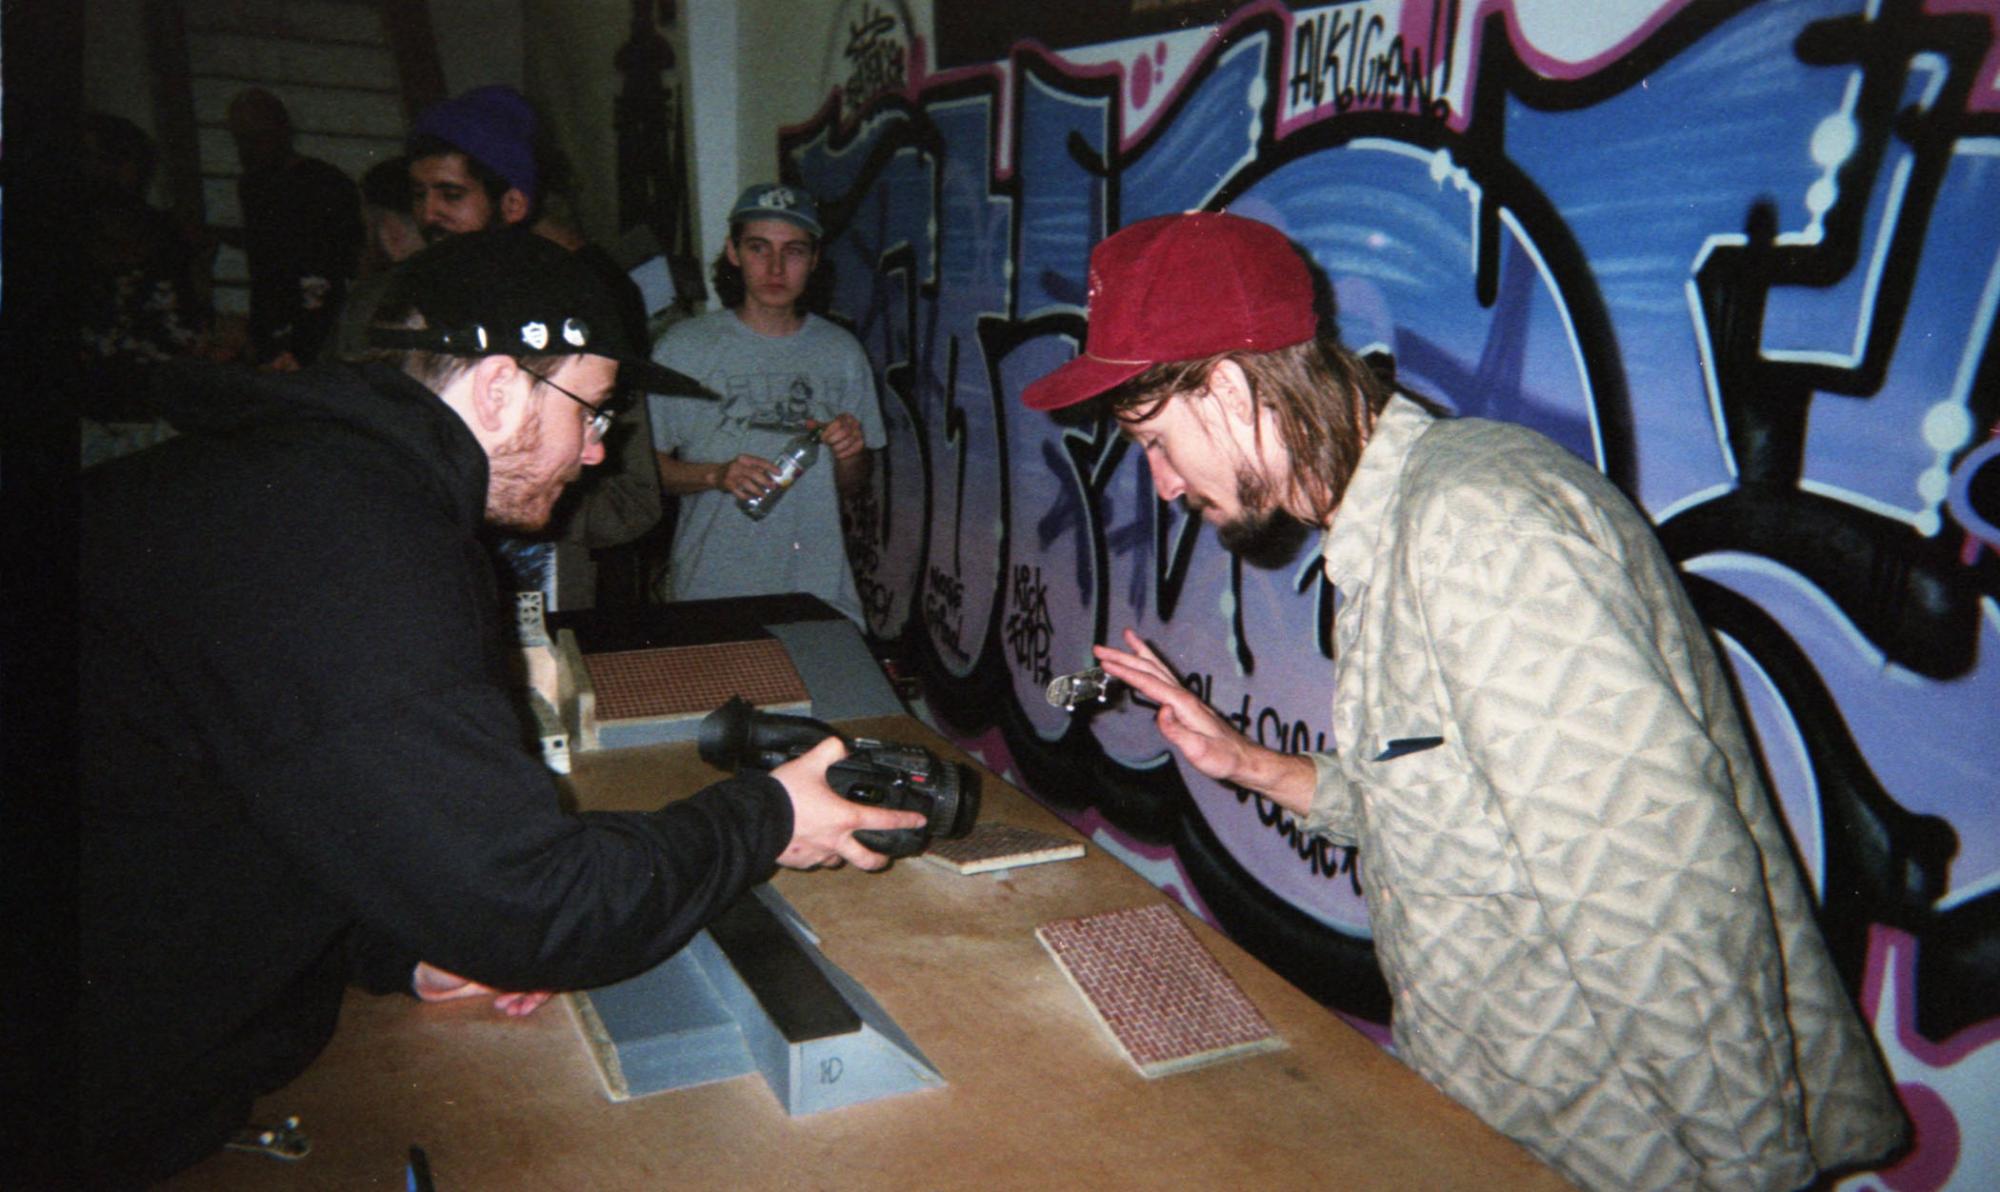 Person wearing red hat and grey coat uses miniature skateboard to do a trick in a miniature skatepark, while another man in black hat and black sweater films.